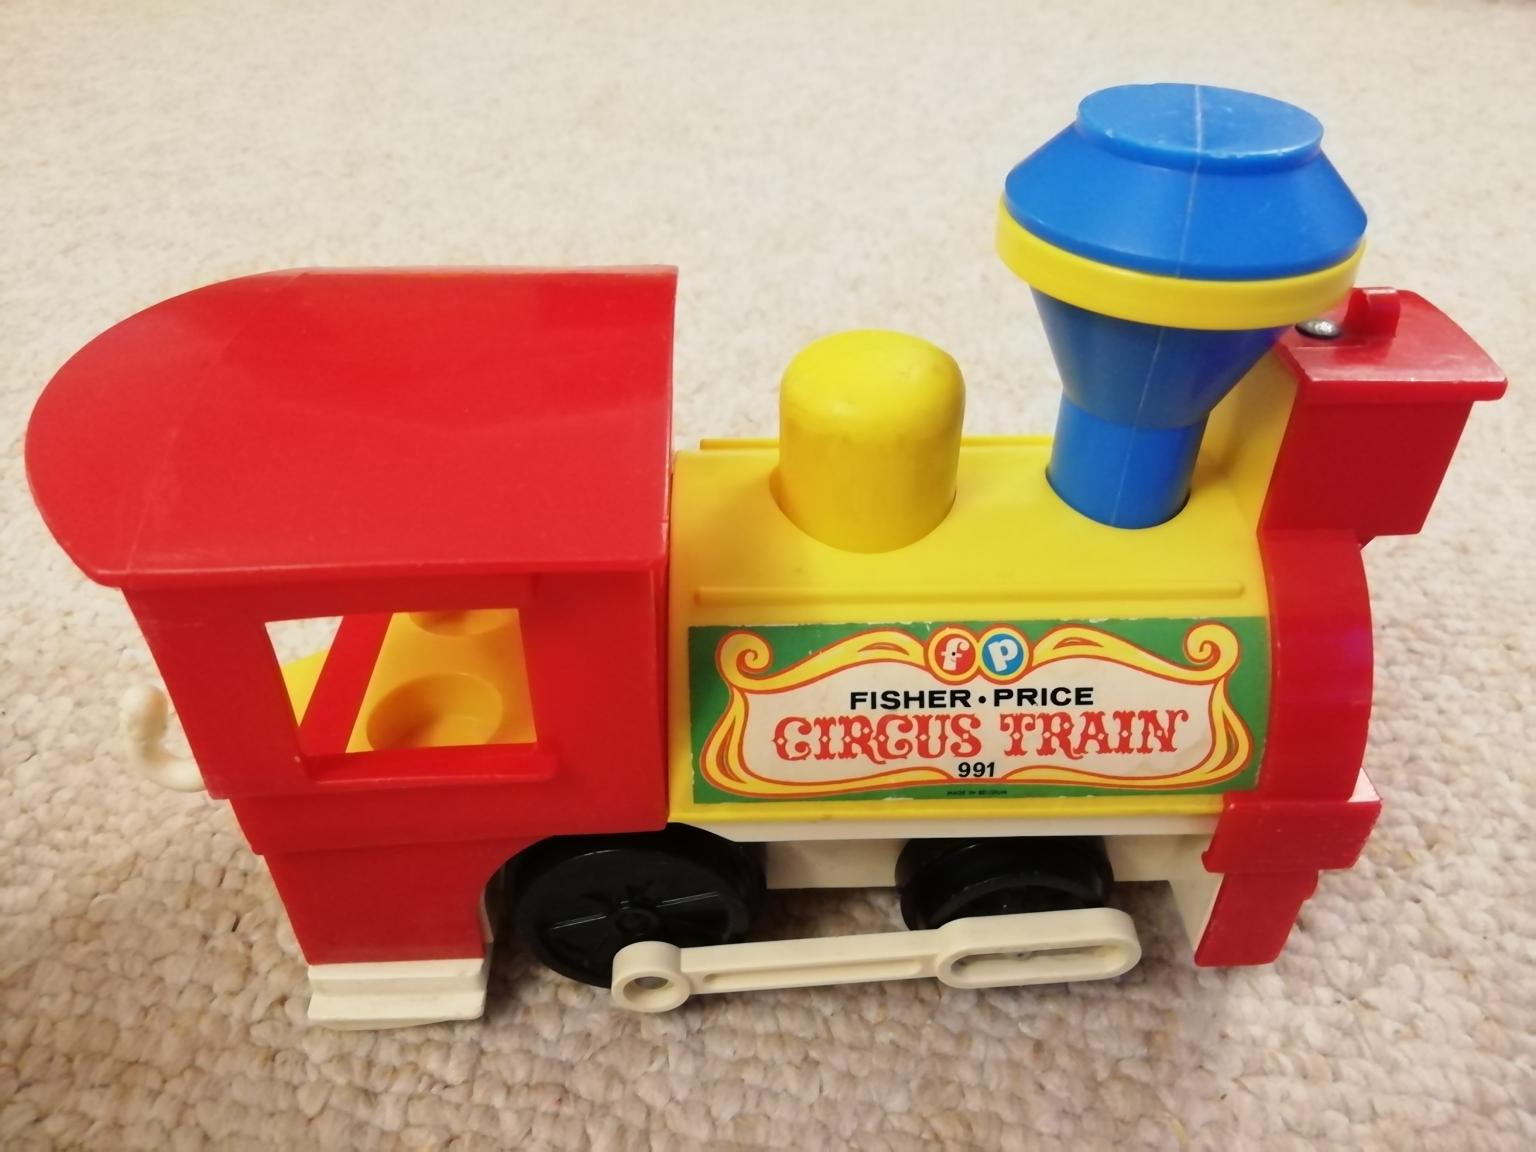 Vintage Fisher Price Circus Train in ME5 Chatham for £30